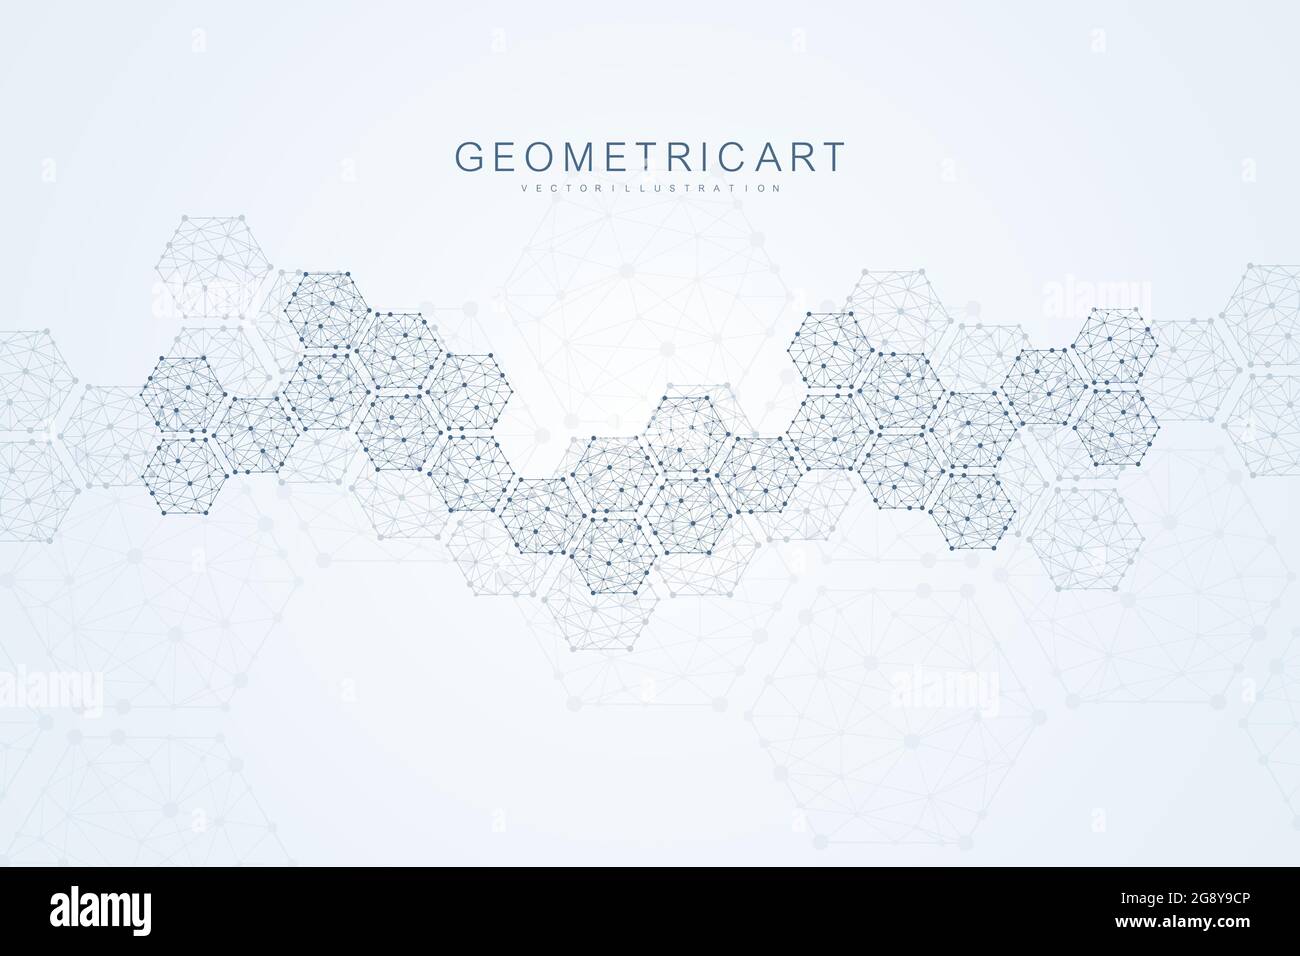 Hexagonal abstract background. Big Data Visualization. Global network connection. Medical, technology, science background. Vector illustration. Stock Vector